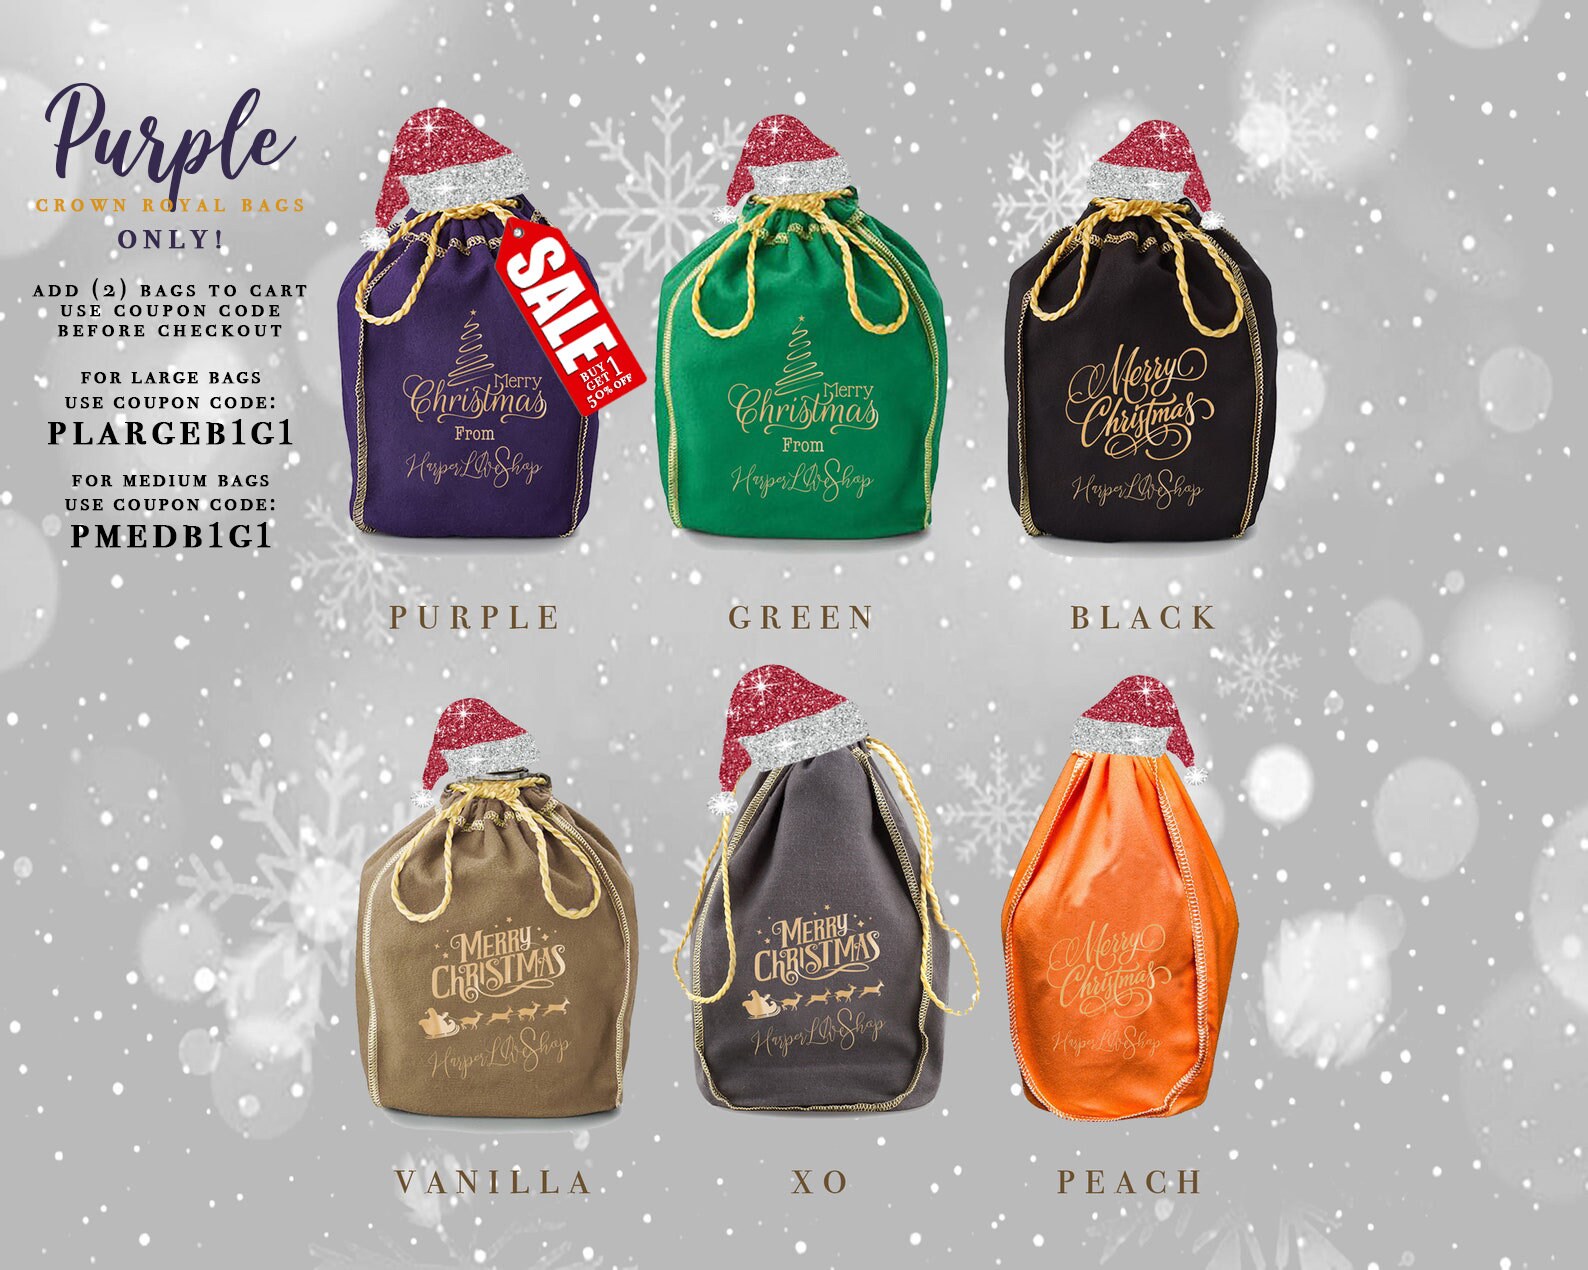 Buy Crown Royal Fine De Luxe Limited Edition Holiday Bag Online